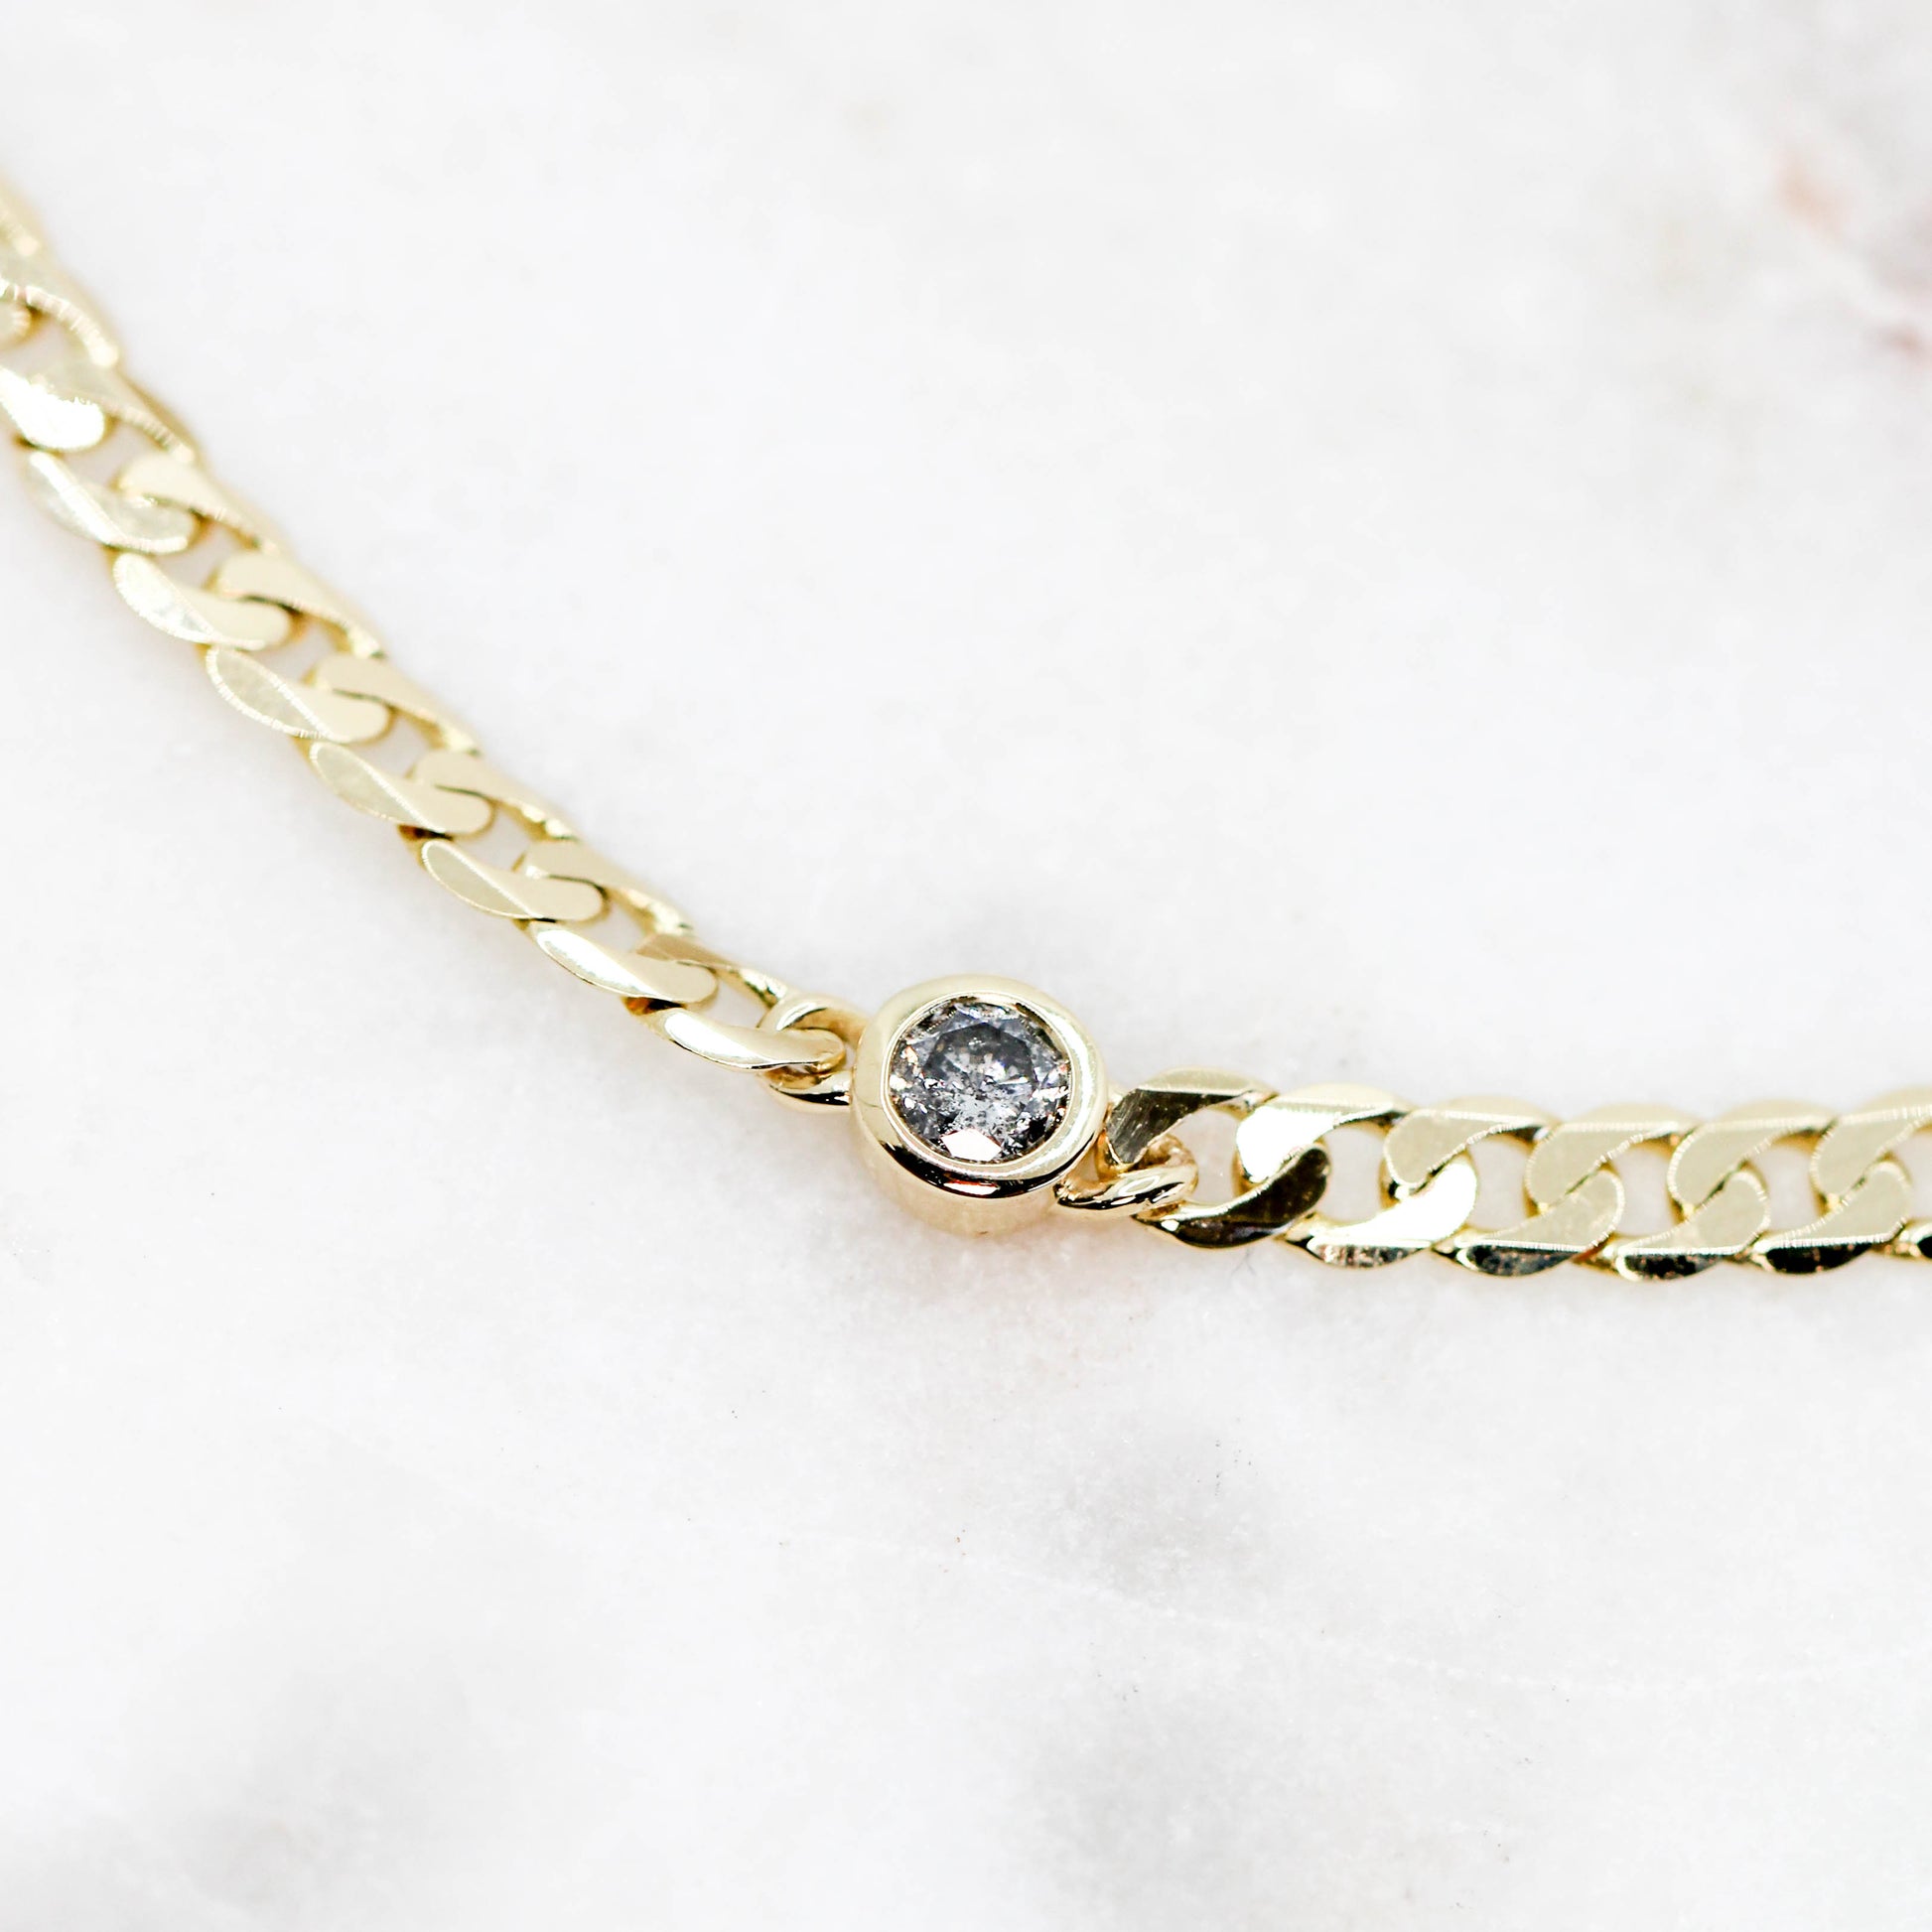 Solitaire Gray Celestial Diamond Bezel Set Curb Chain Bracelet - Made to Order, Your Choice of 14k Gold - Midwinter Co. Alternative Bridal Rings and Modern Fine Jewelry